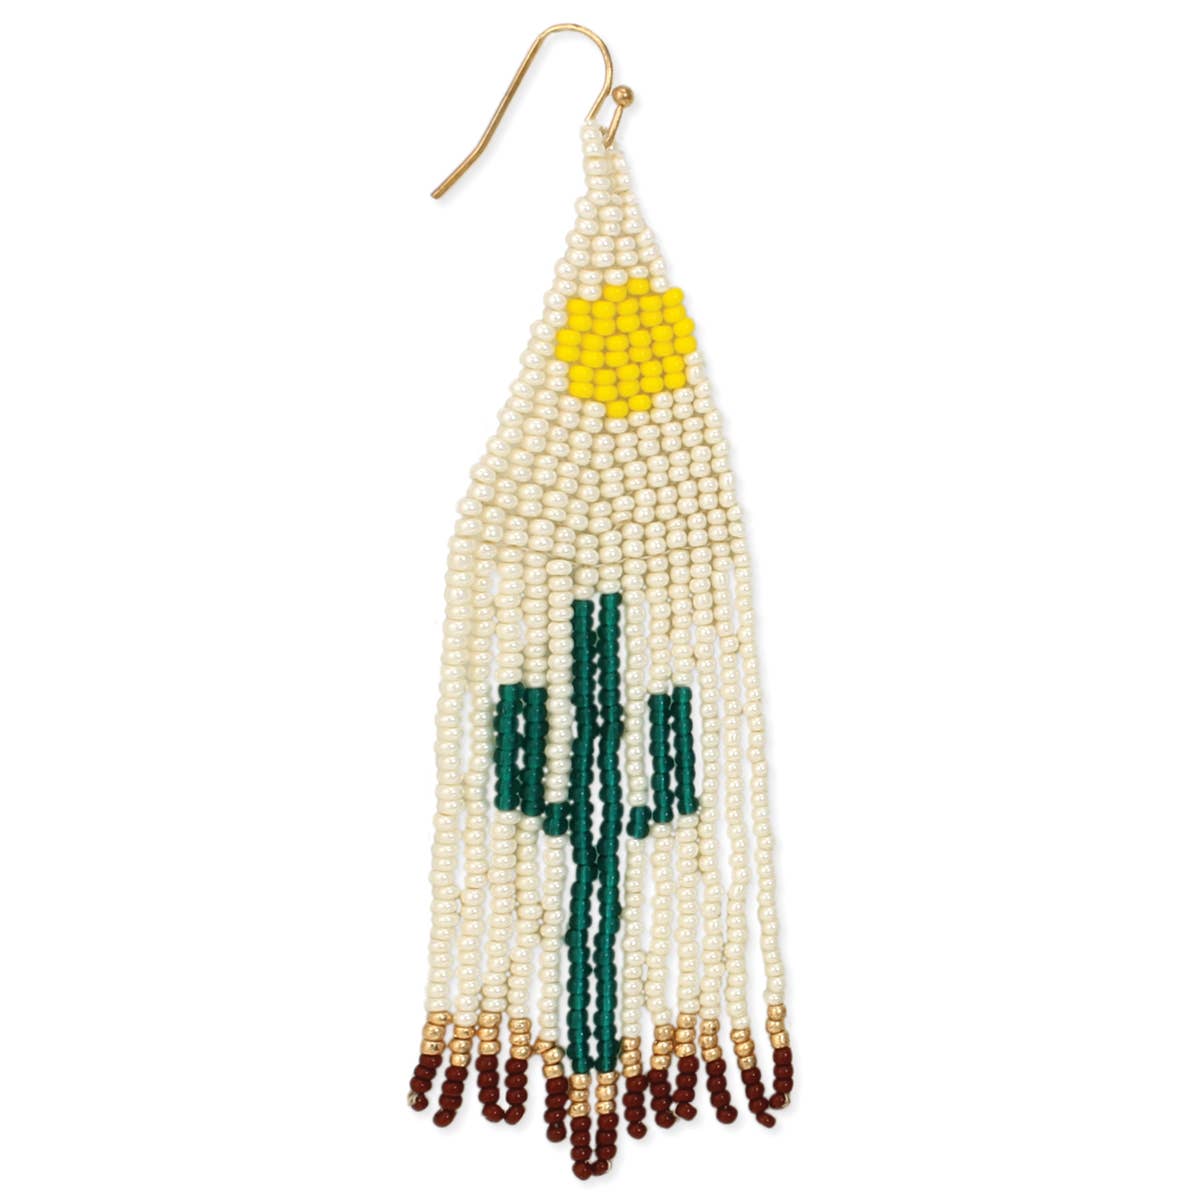 Triangular glass bead earrings featuring a green cactus, yellow sun, gold and dark red bottom and a cream background. 